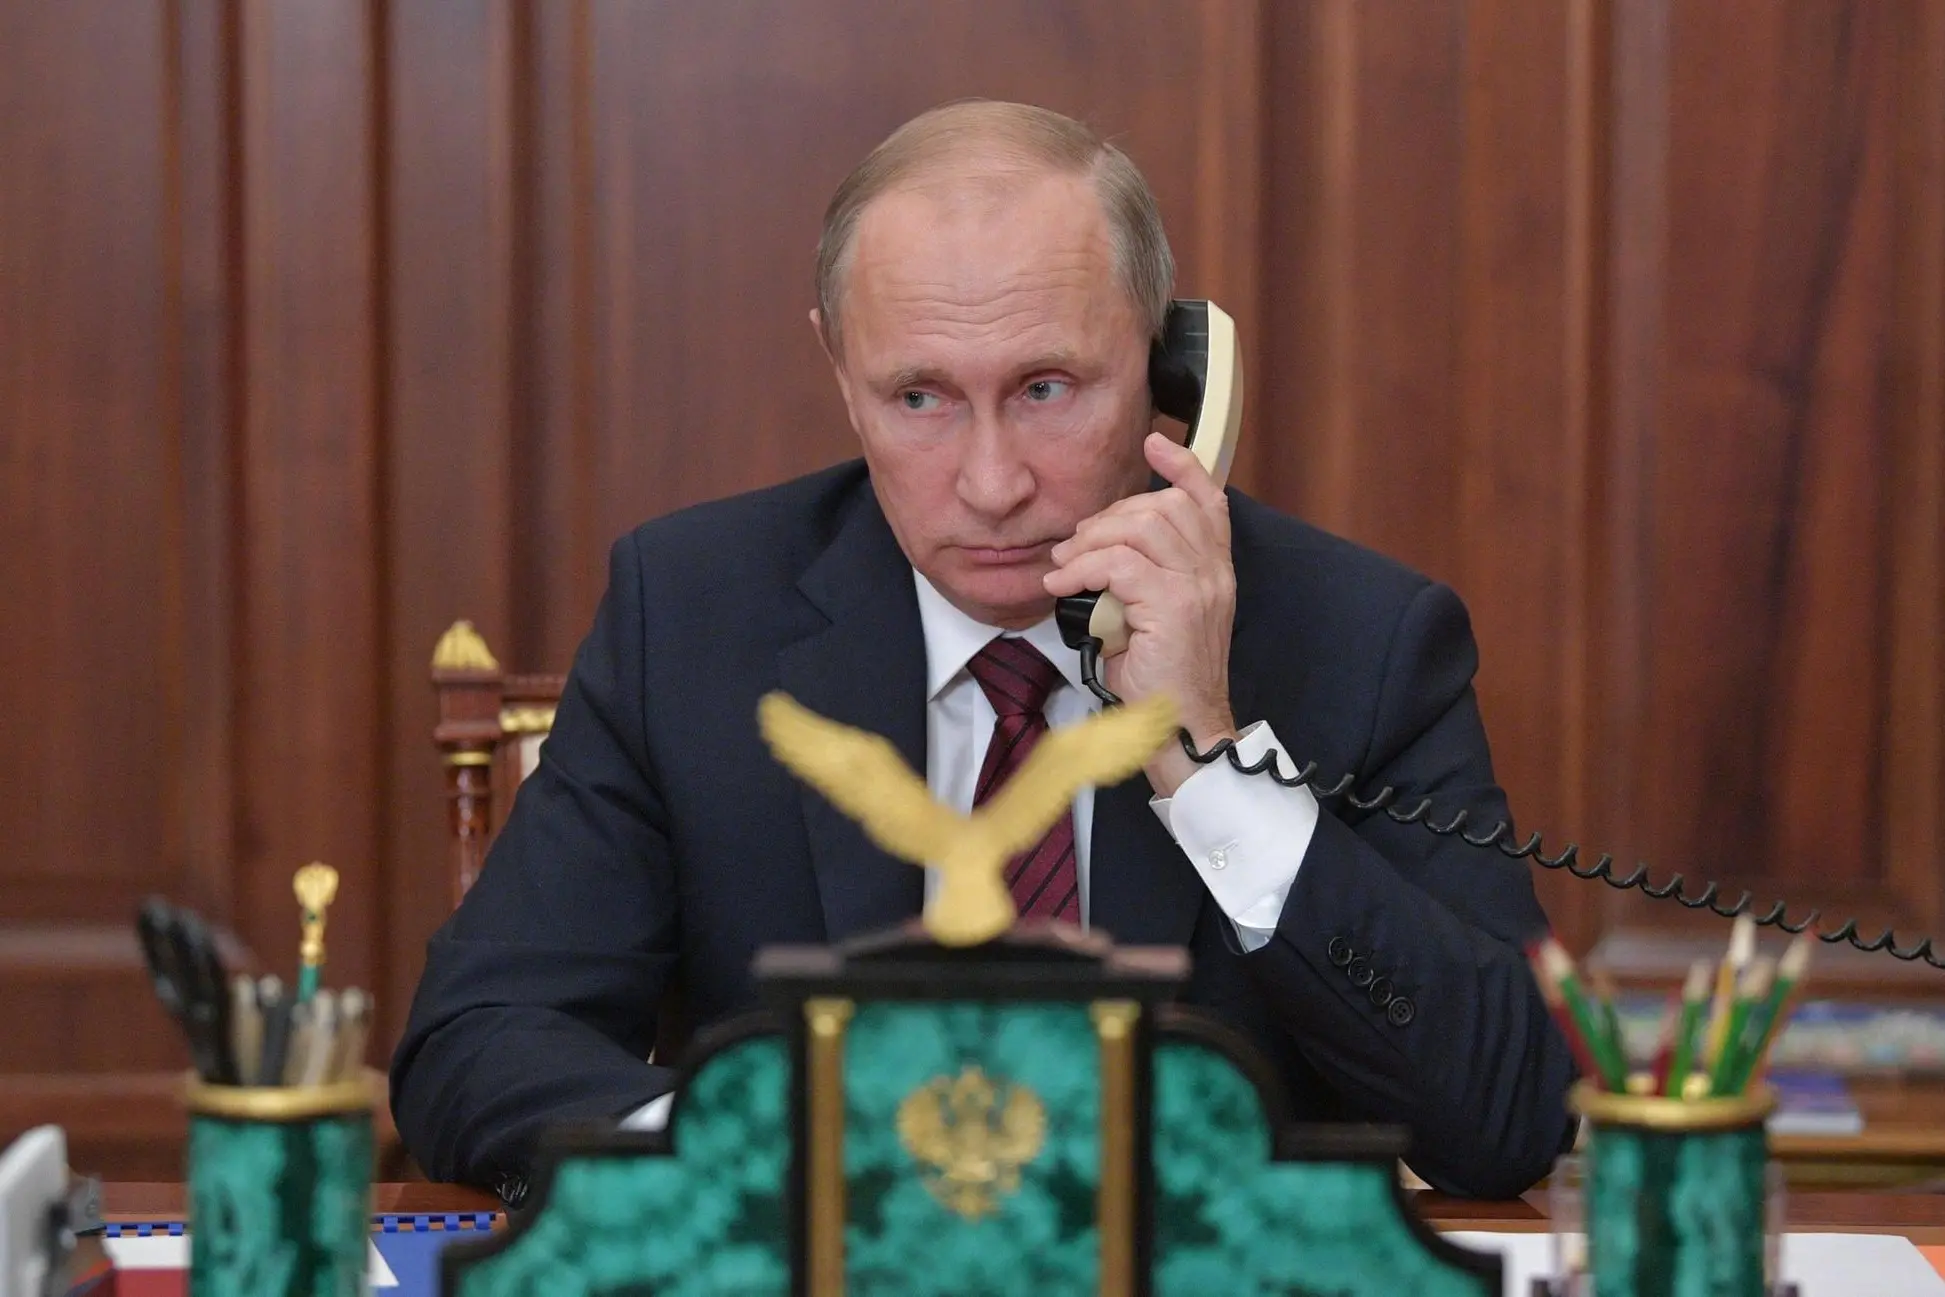 epa06331847 Russian President Vladimir Putin holds a telephone conversation with leaders of the self-proclaimed republics, Donetsk People's Republic (DPR) and Luhansk People's Republic (LPR), in the Kremlin in Moscow, Russia, 15 November 2017. President Putin discussed with the two leaders Ukrainian politician Viktor Medvedchuk's proposal on swapping captives between Ukraine and the self-proclaimed republics. EPA/ALEXEI DRUZHININ / SPUTNIK / KREMLIN POOL